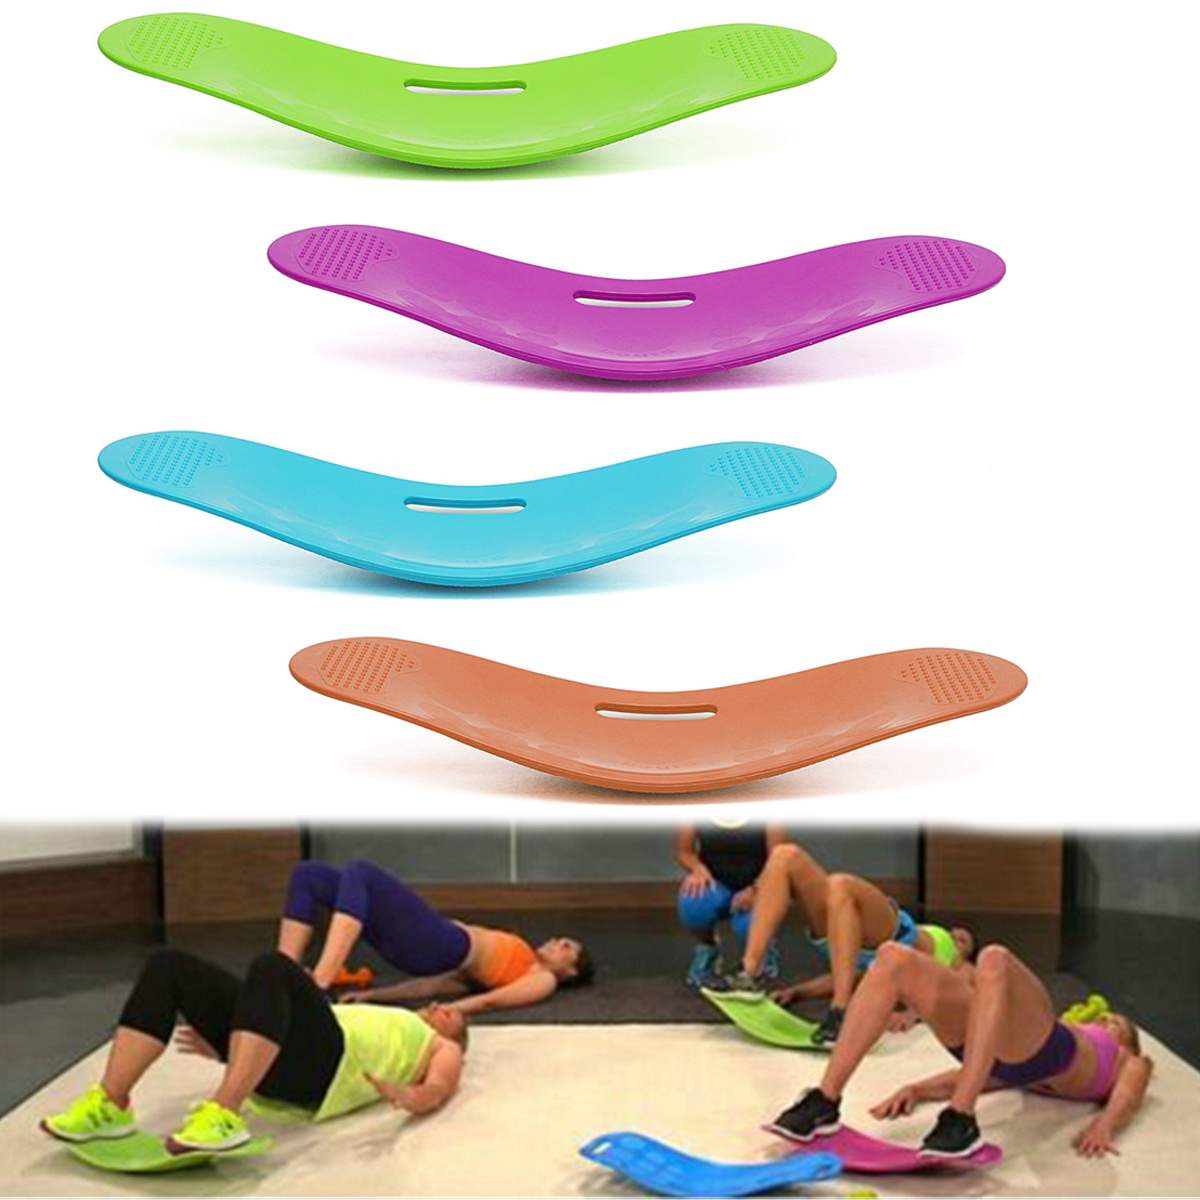 ABS Twisting Fitness Balance Board Simple Core Workout Yoga Twister Training Abdominal Muscles Legs Balance Pad Prancha Fitness